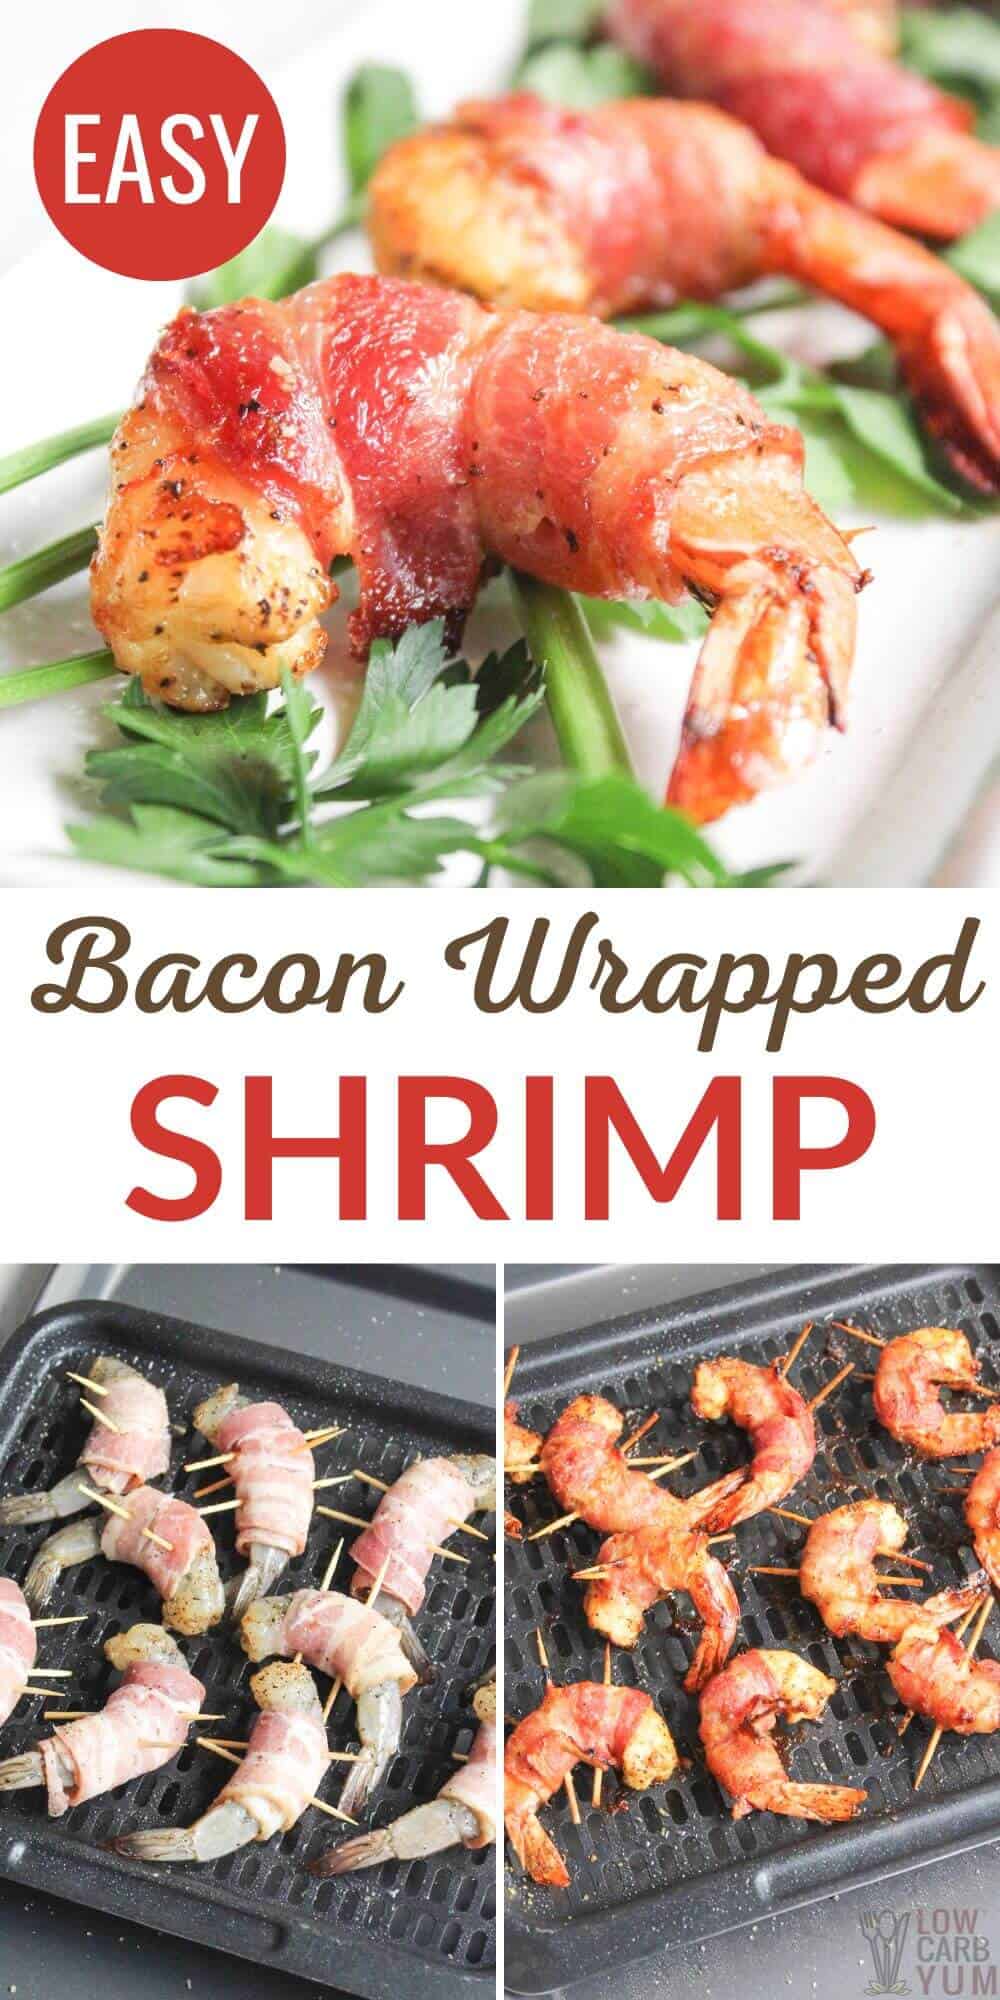 Bacon wrapped shrimp on a grill.